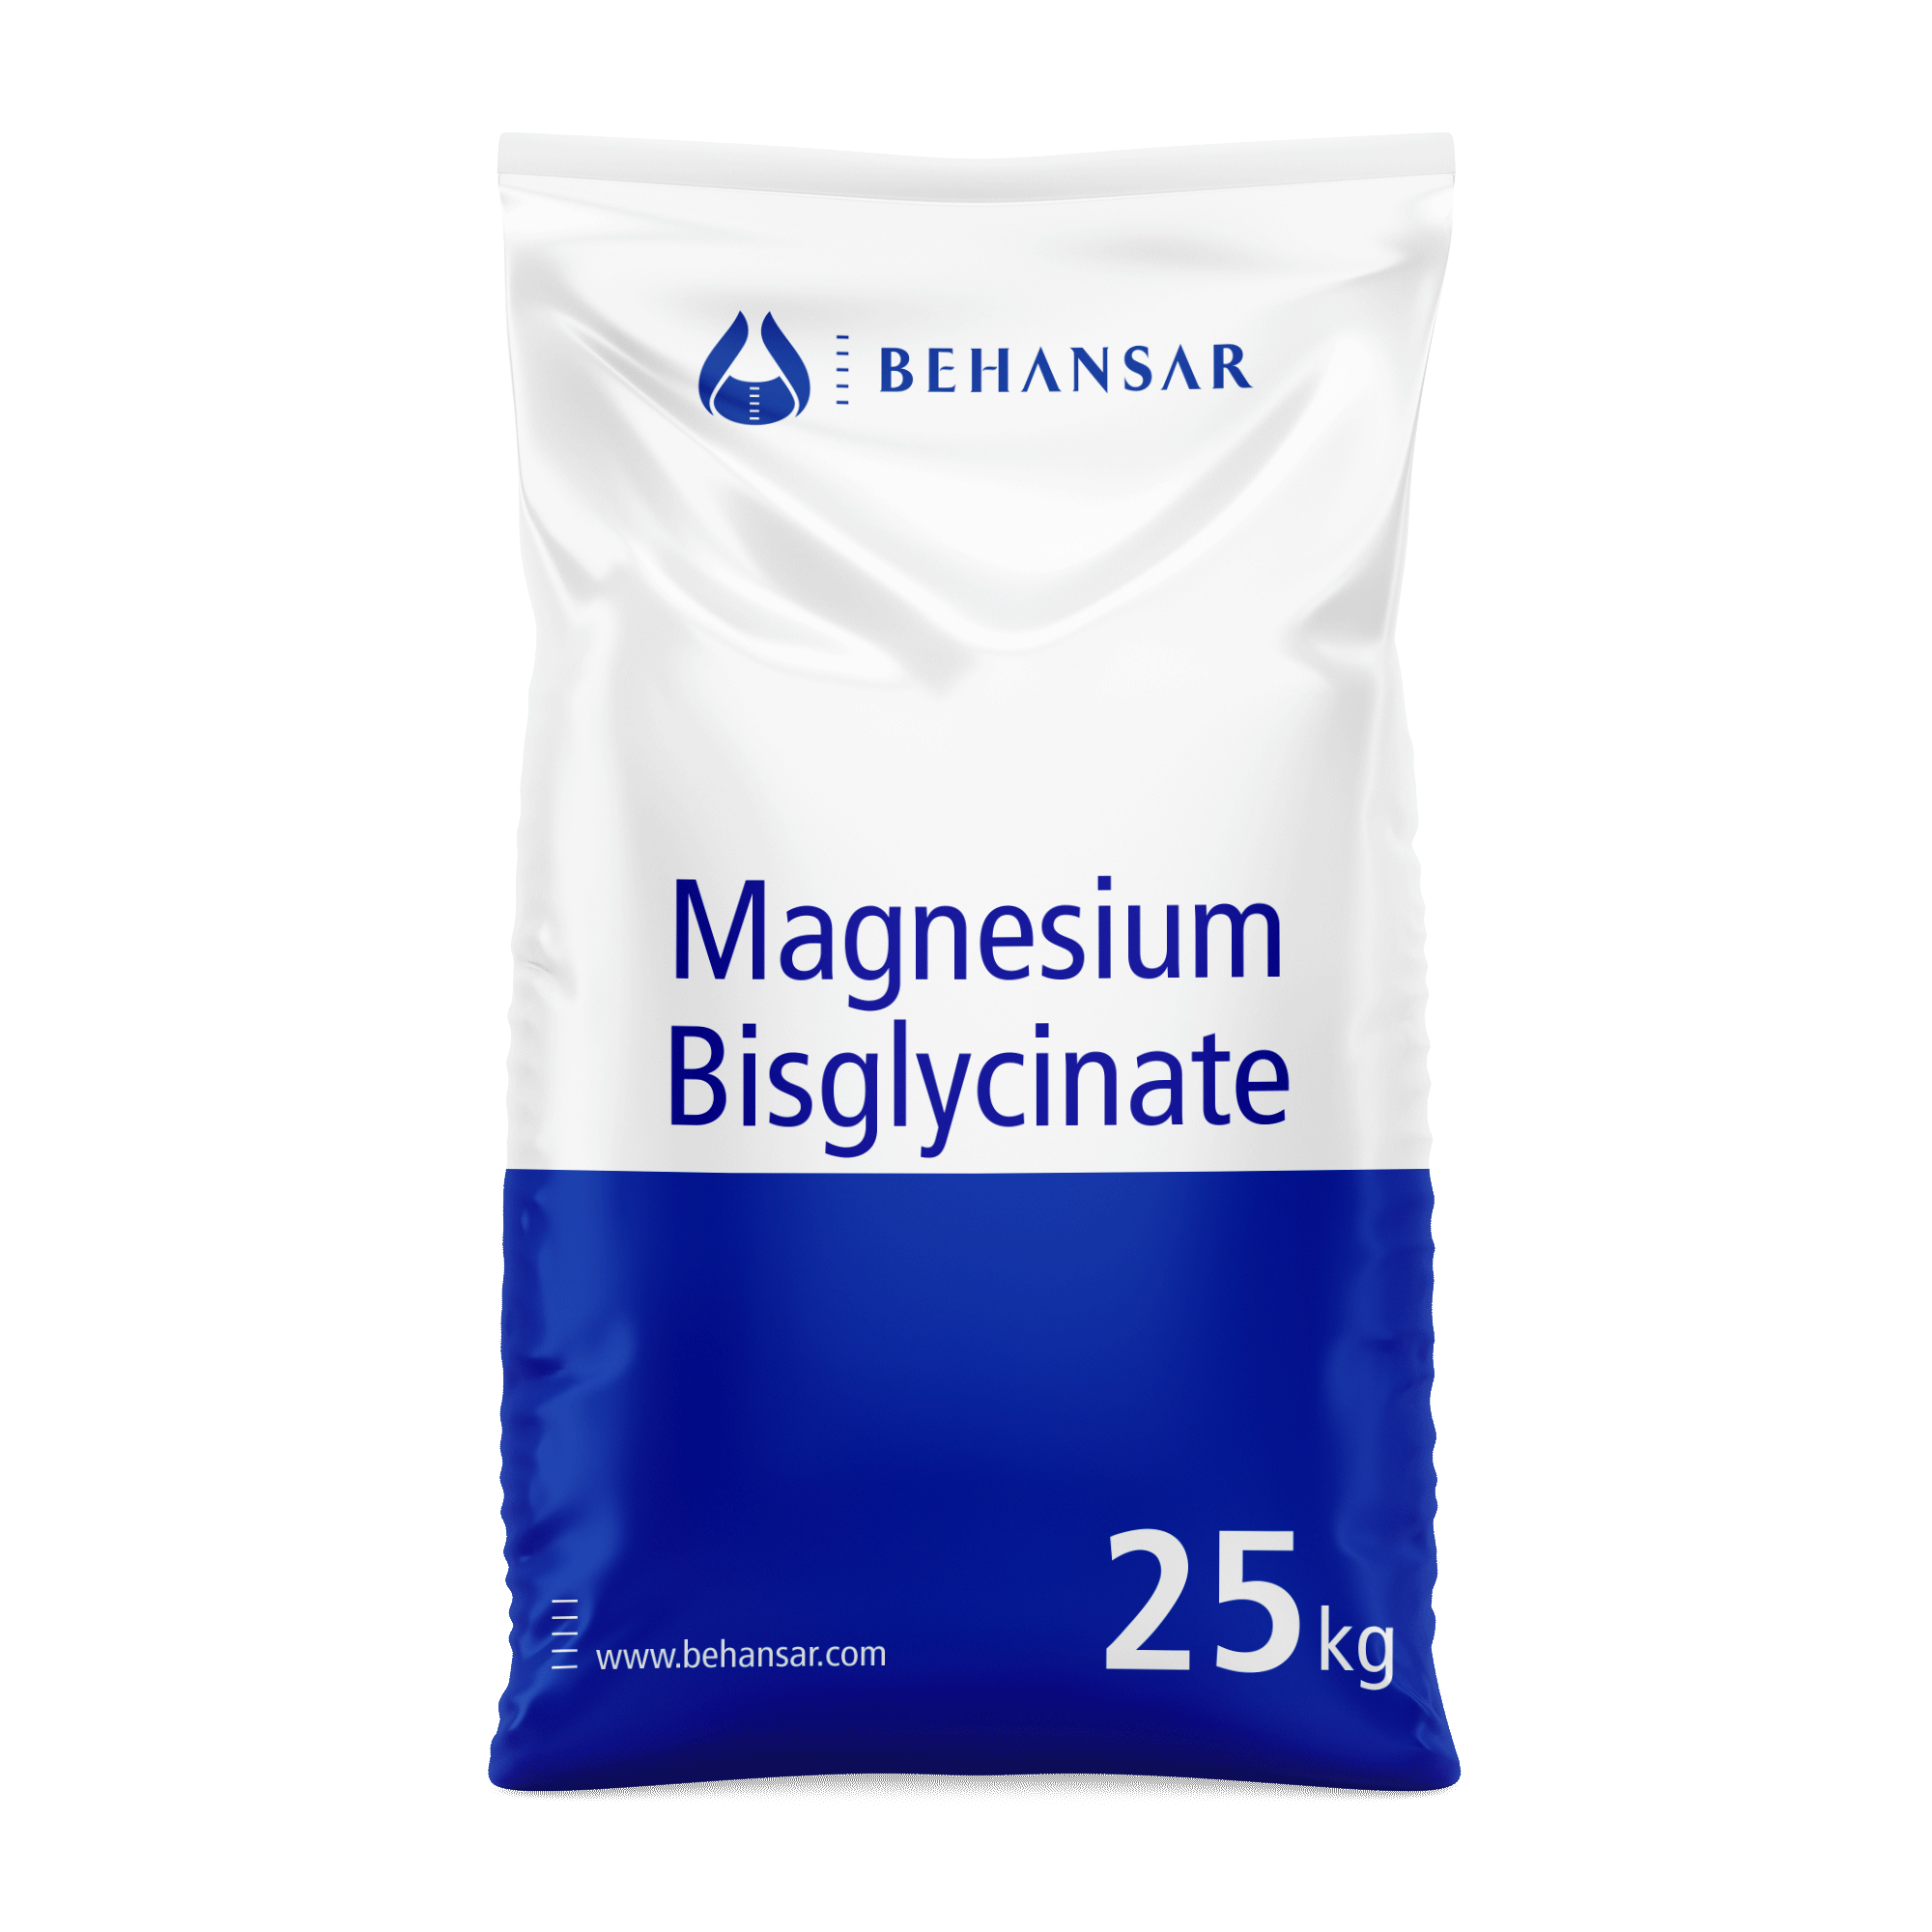 Magnesium Bisglycinate is one of the products of Behansar Co